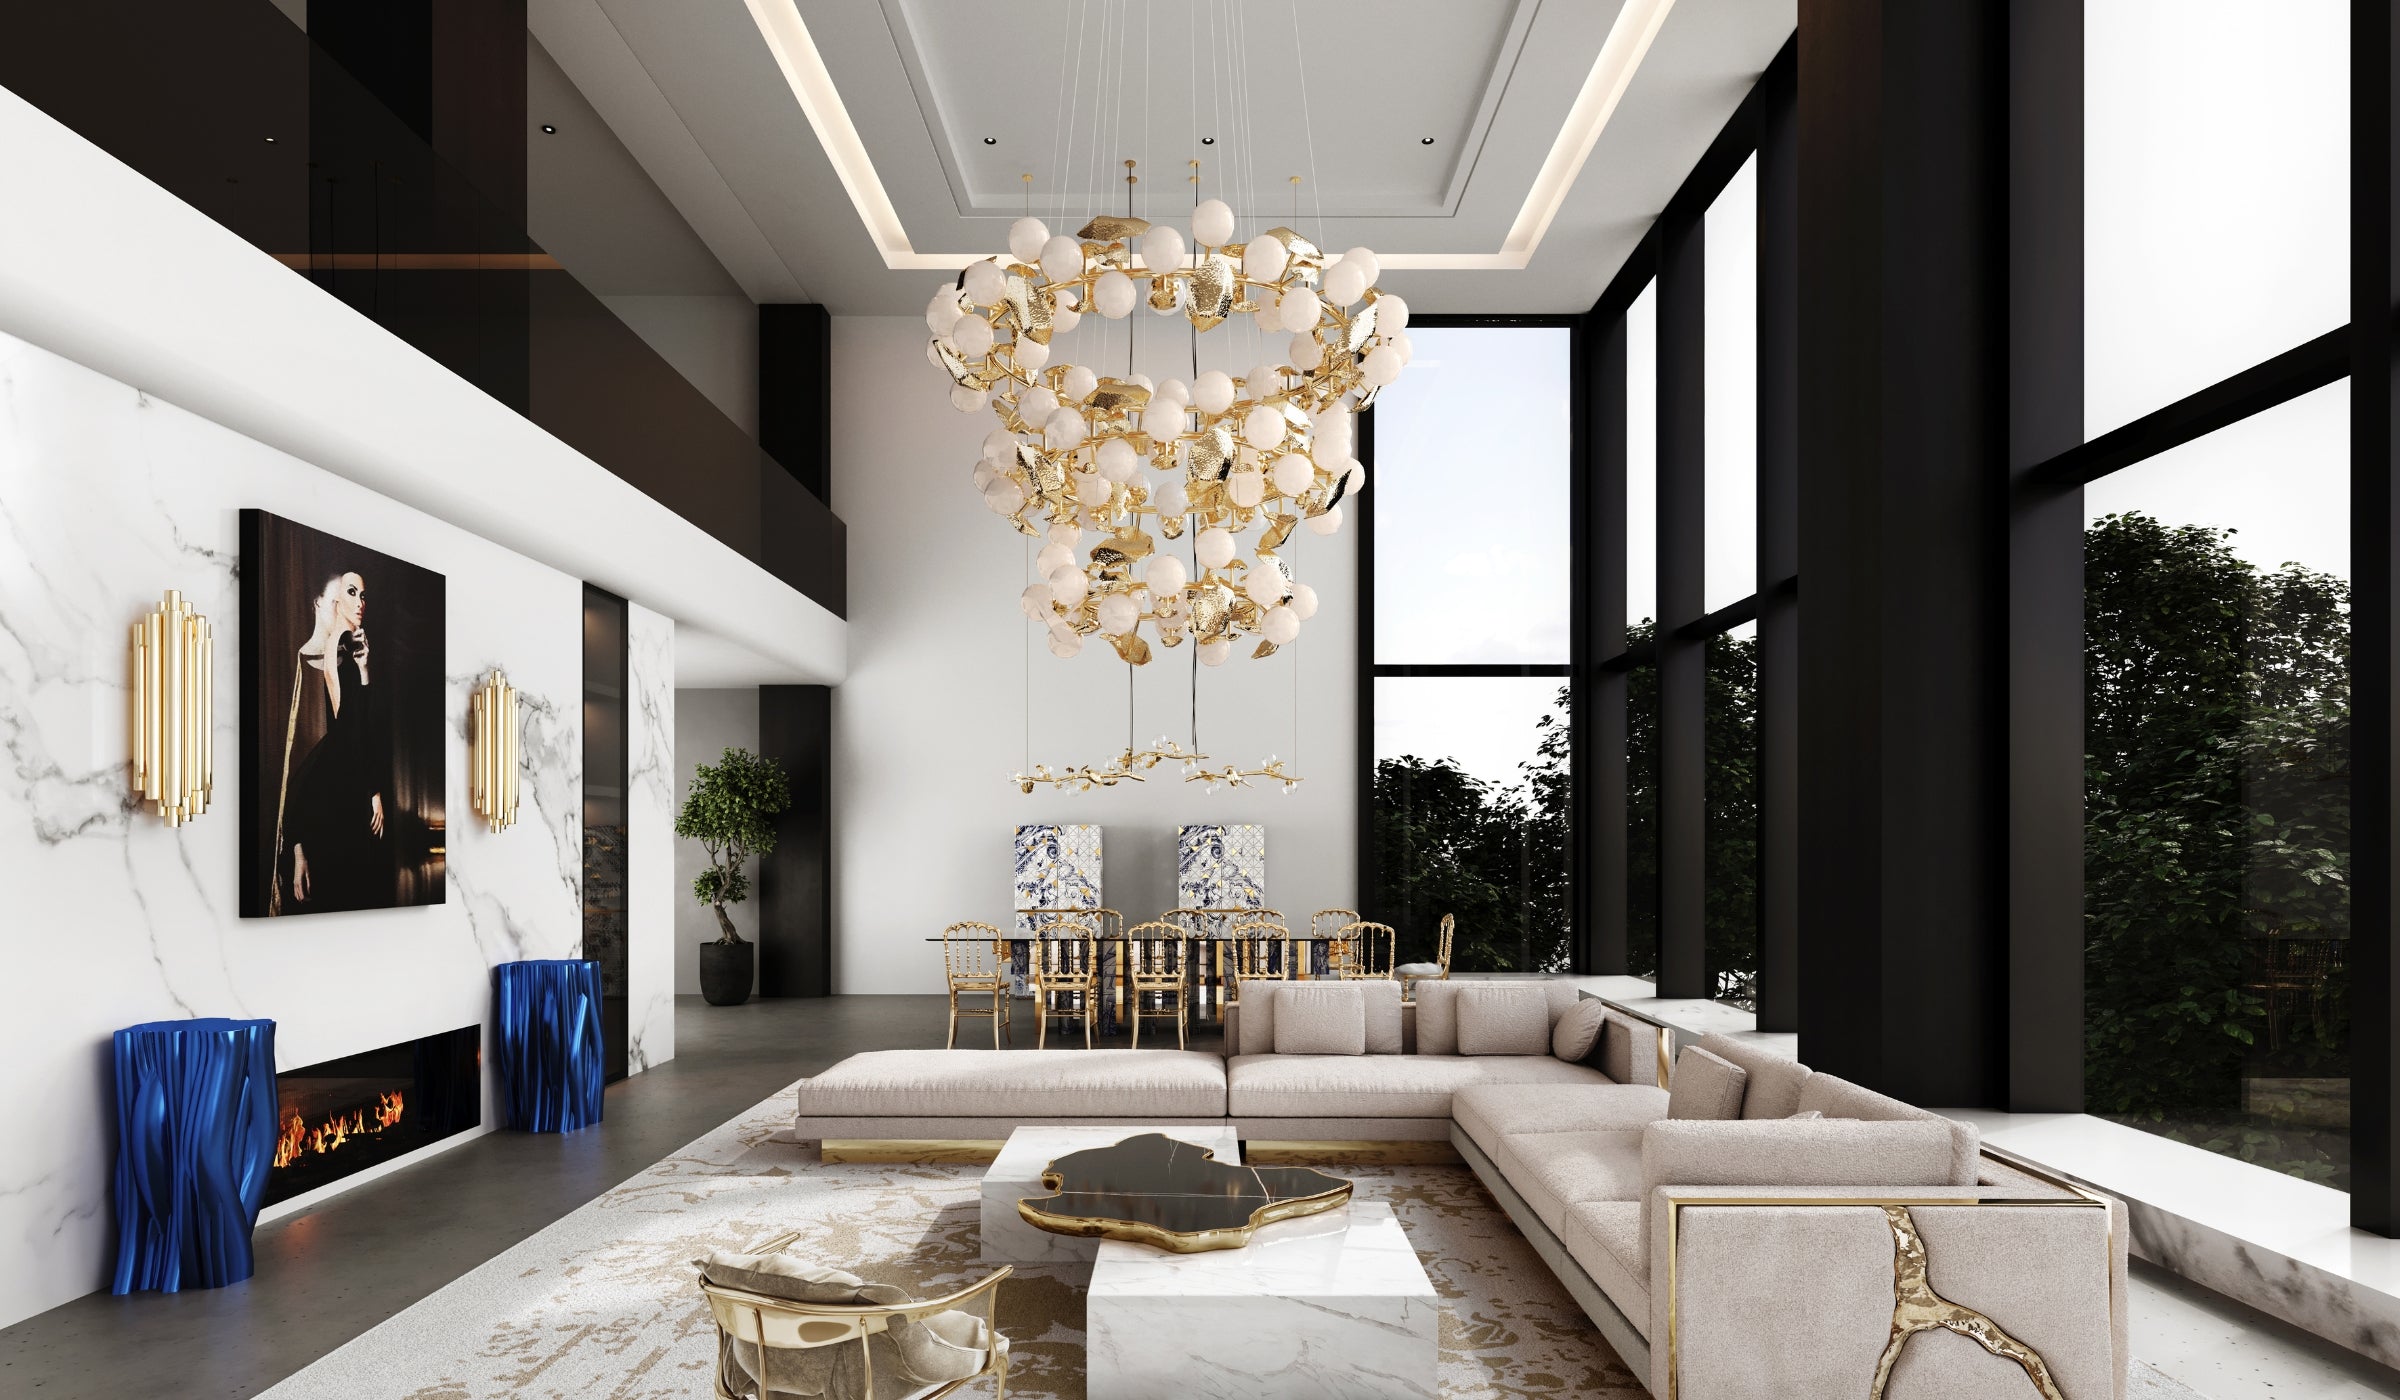 Hera round III - Majestic pendant light in polished brass and glass for sophisticated decoration